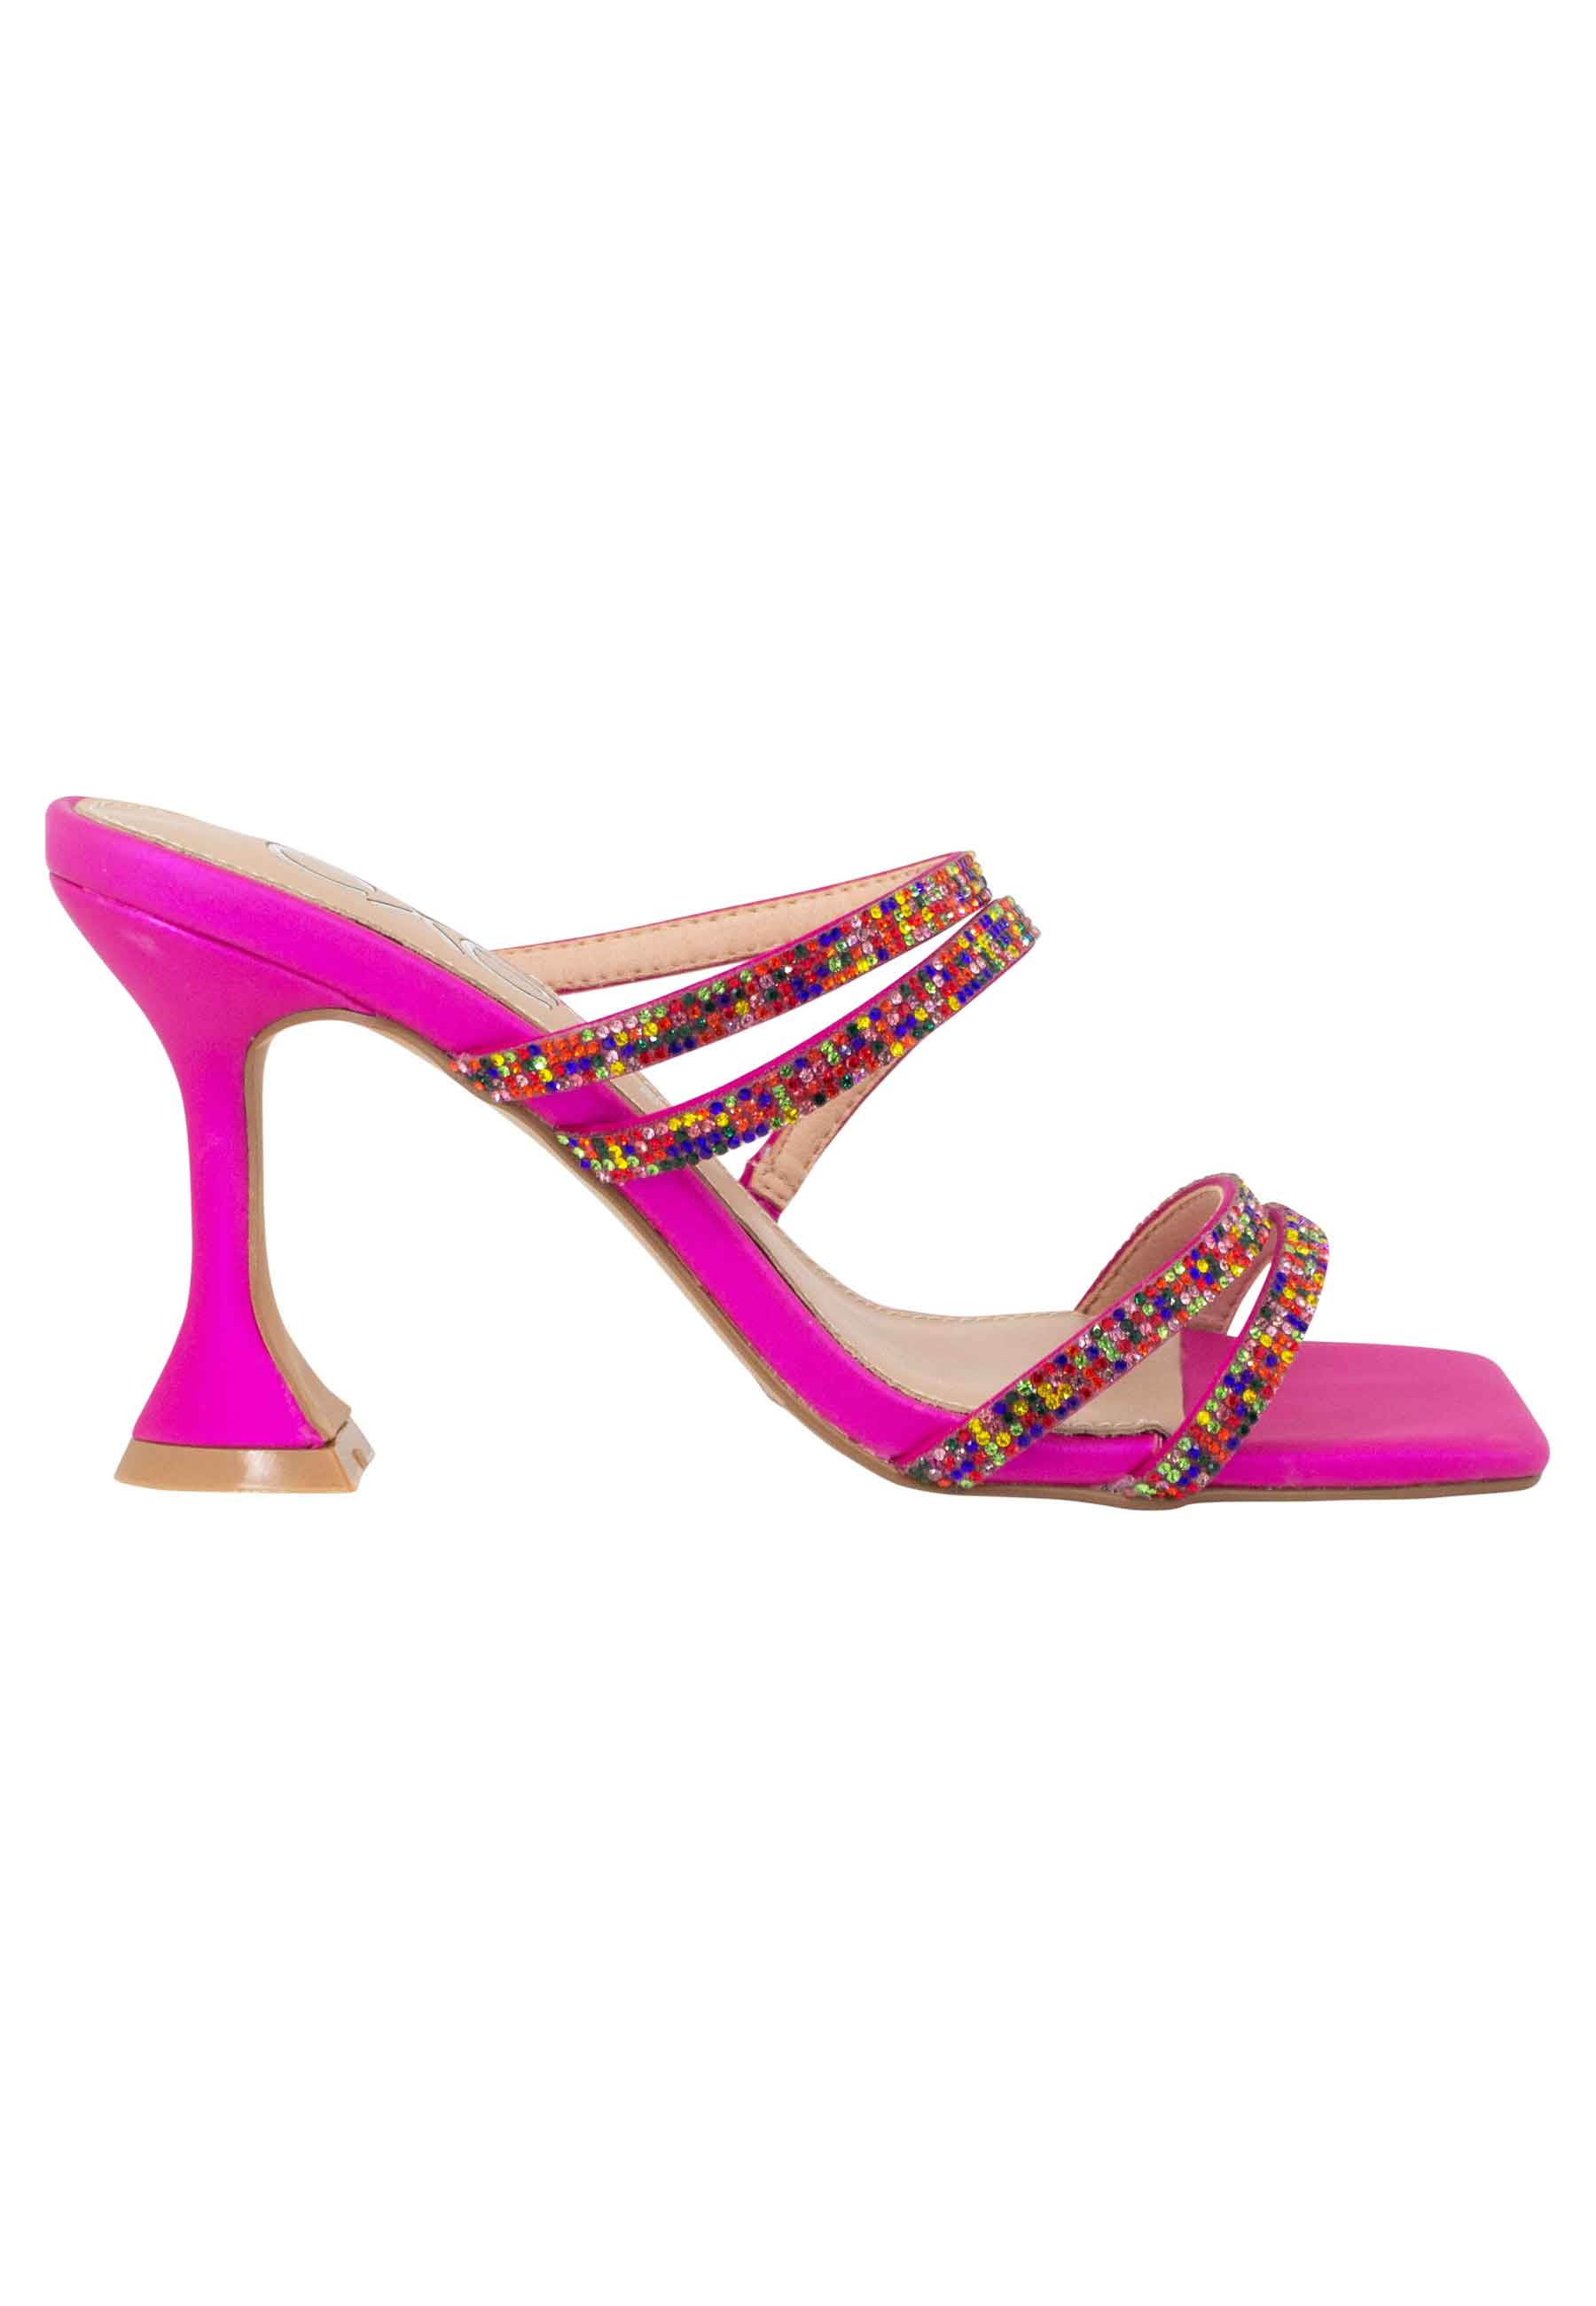 Women's sandals in fuchsia fabric with high heel and multicolored rhinestones